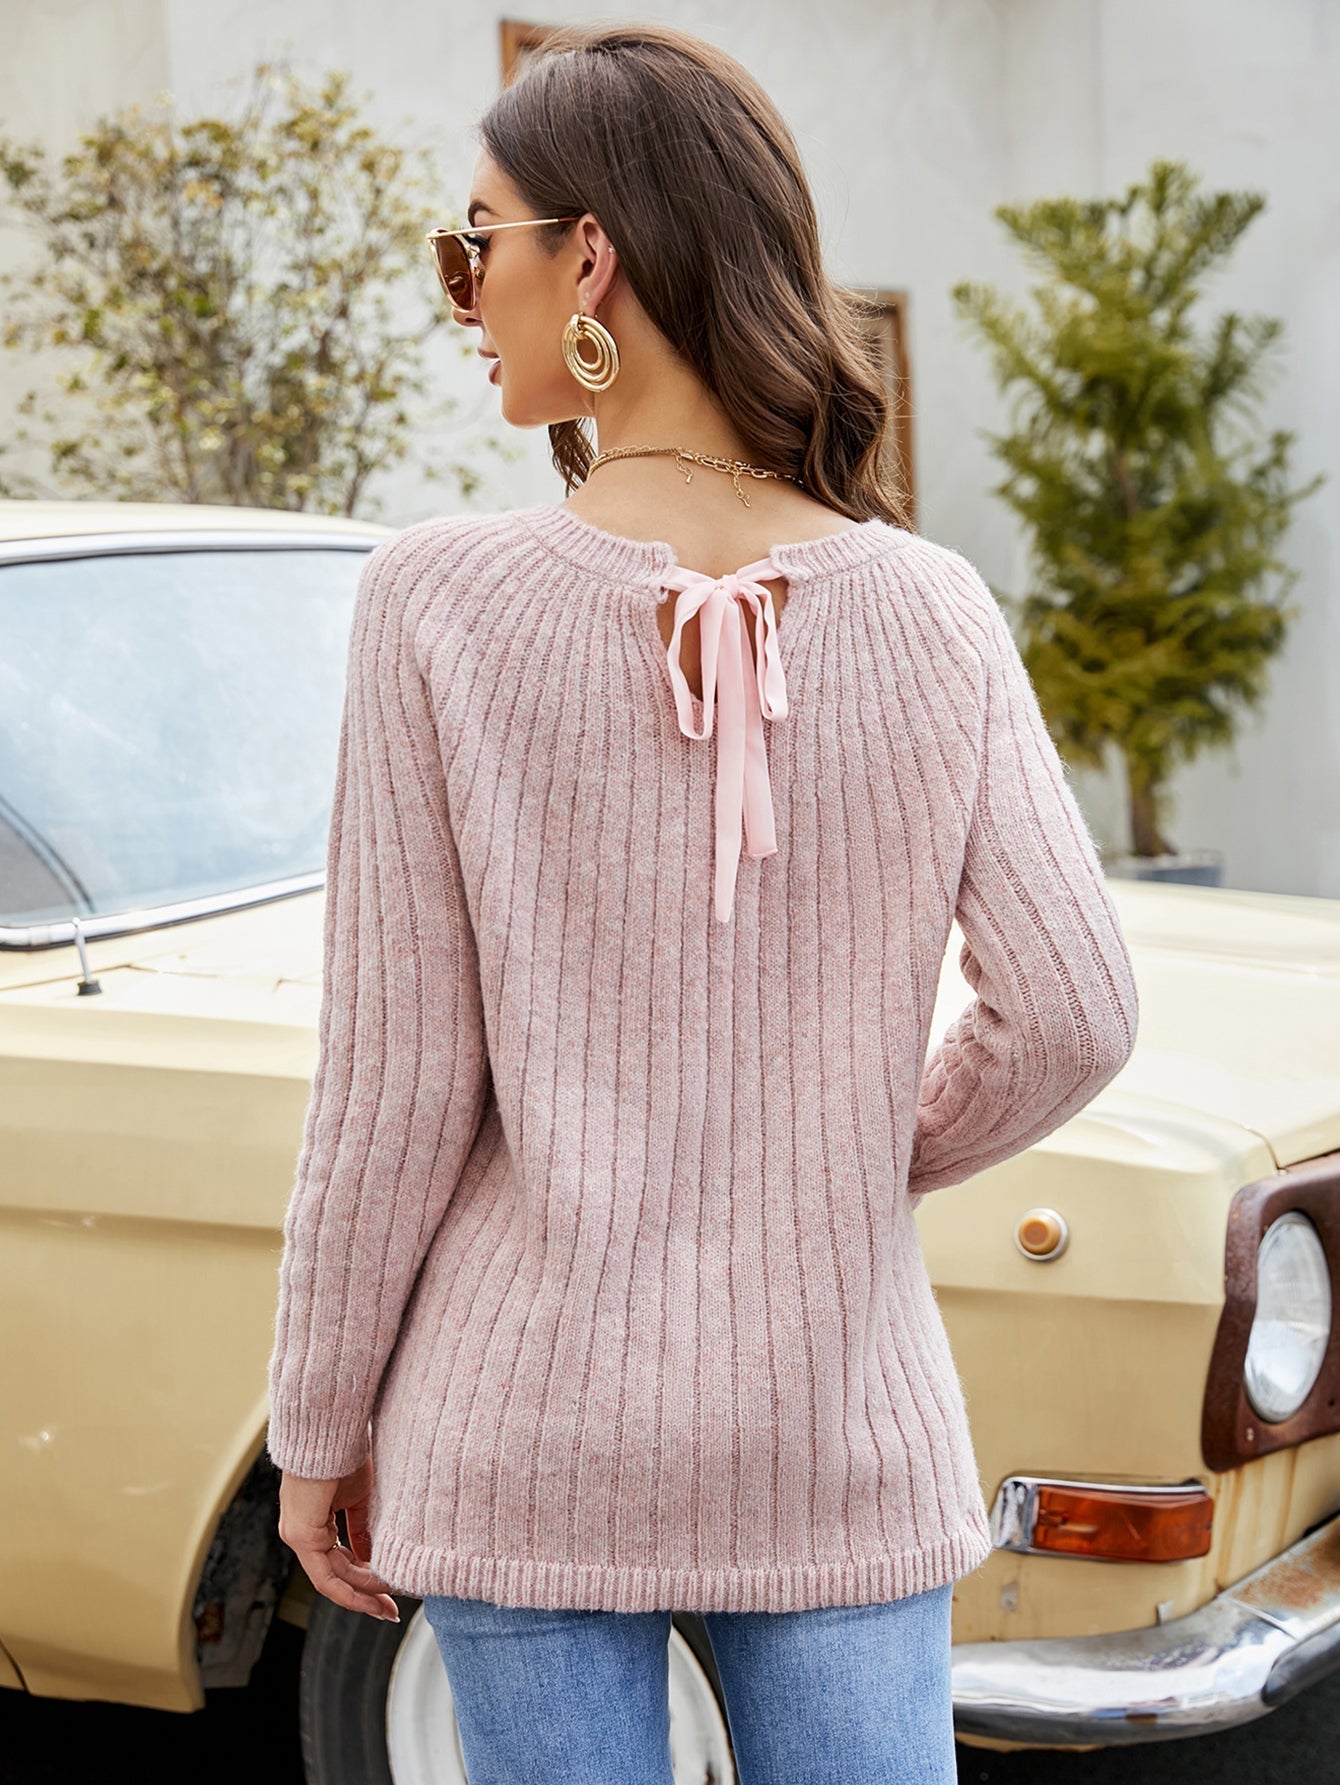 Lace-up solid color knitted sweater Sai Feel